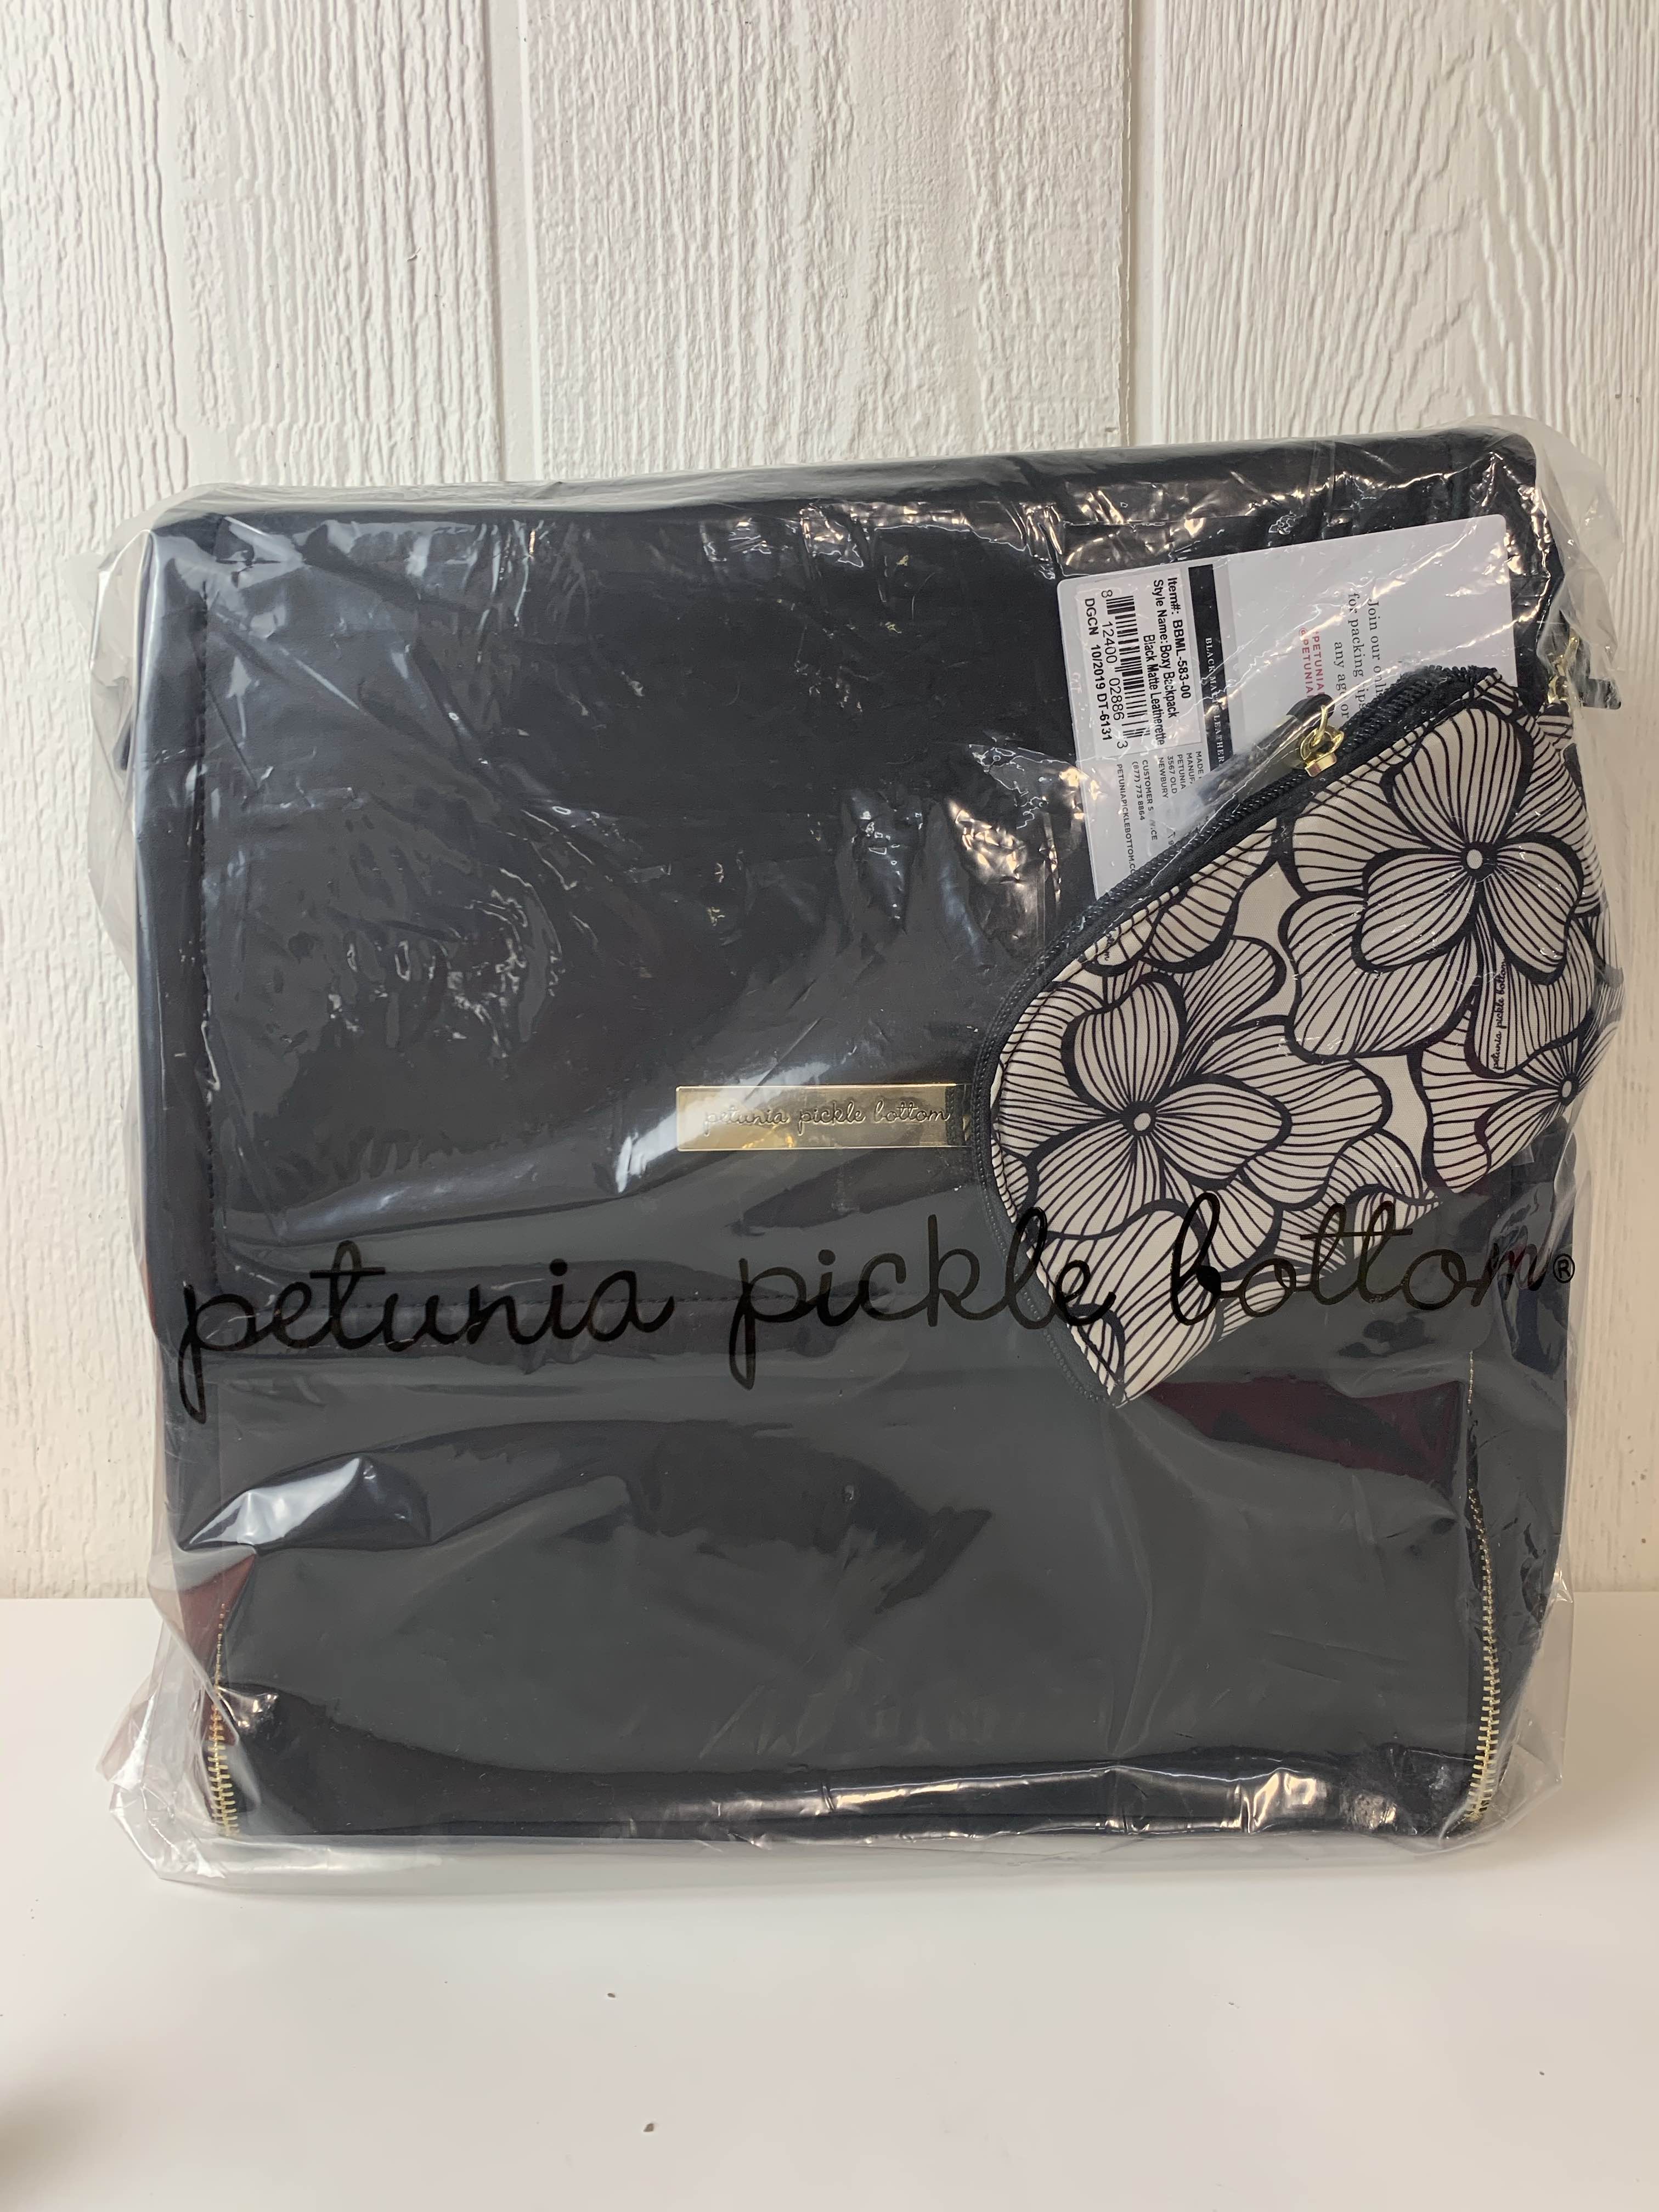 Petunia Pickle Bottom Boxy Backpack in Black Matte Leatherette